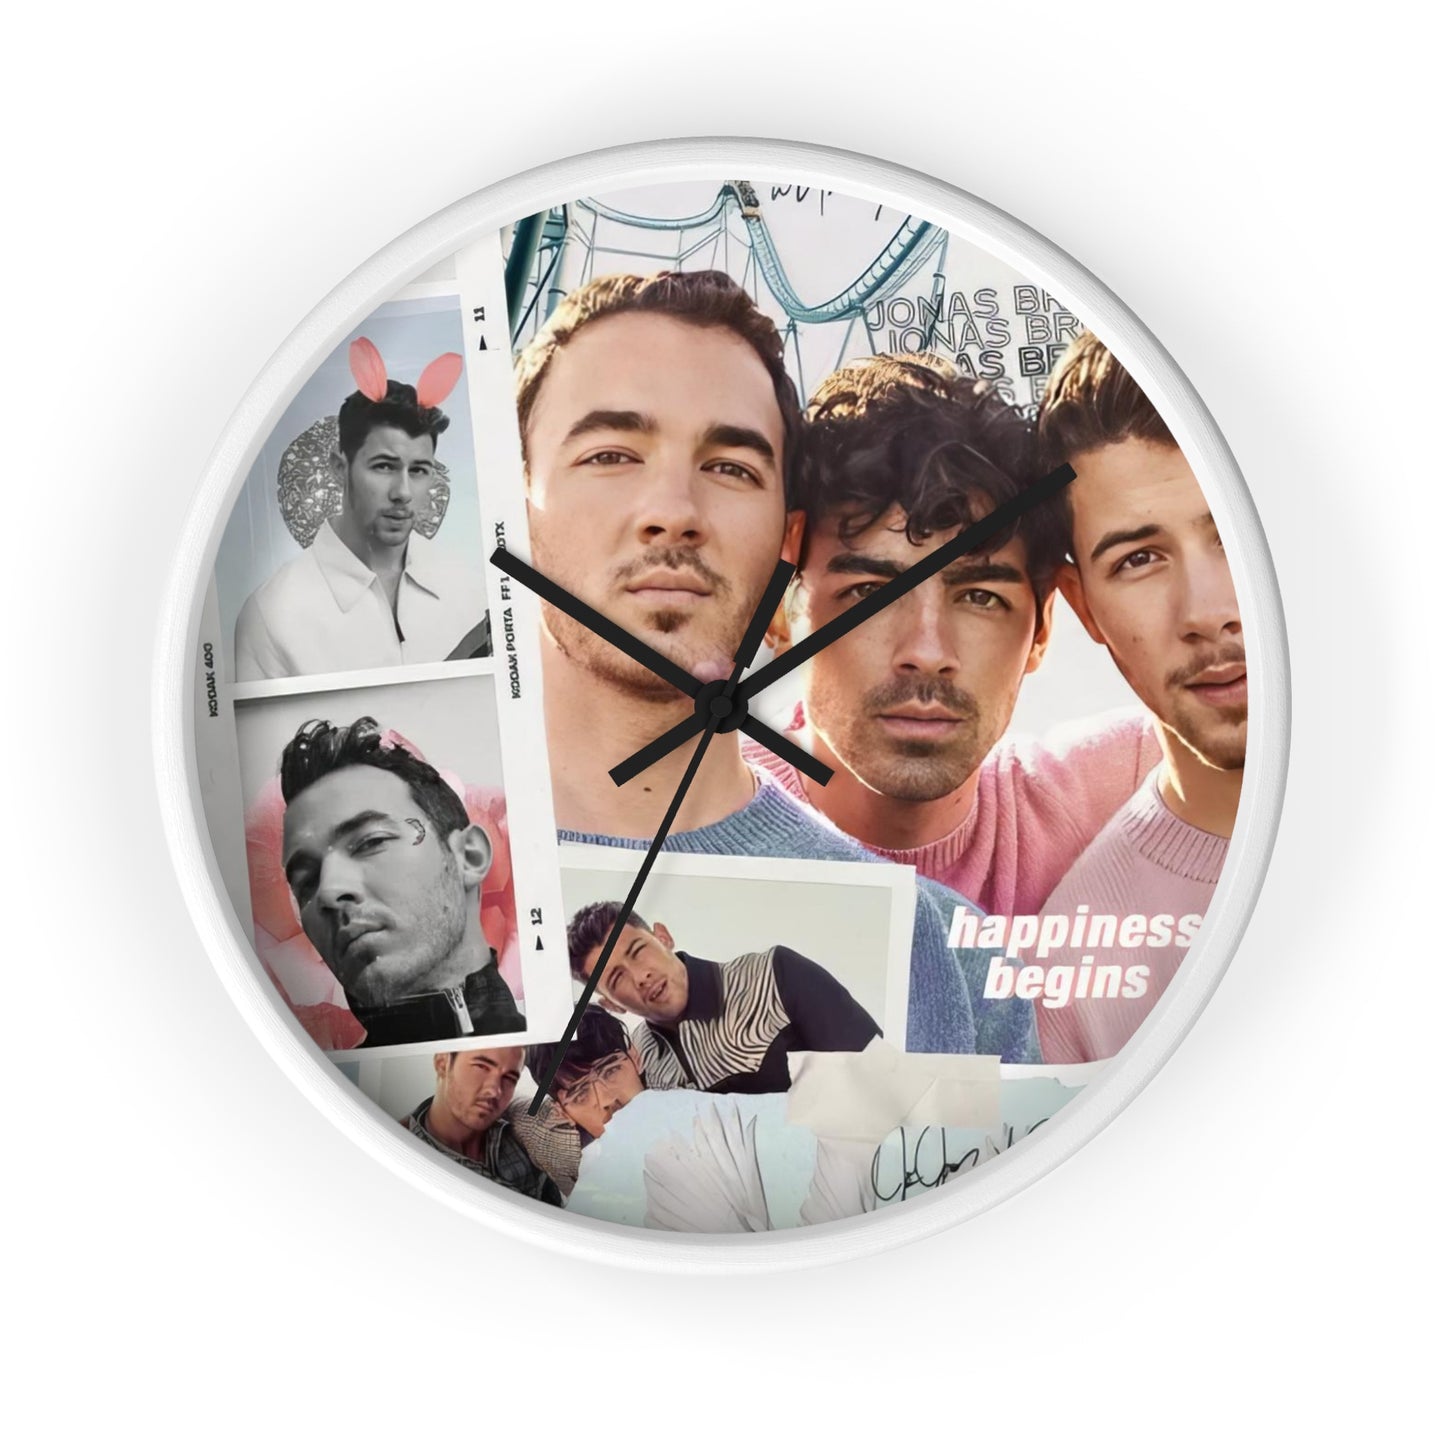 Jonas Brother Happiness Begins Collage Round Wall Clock